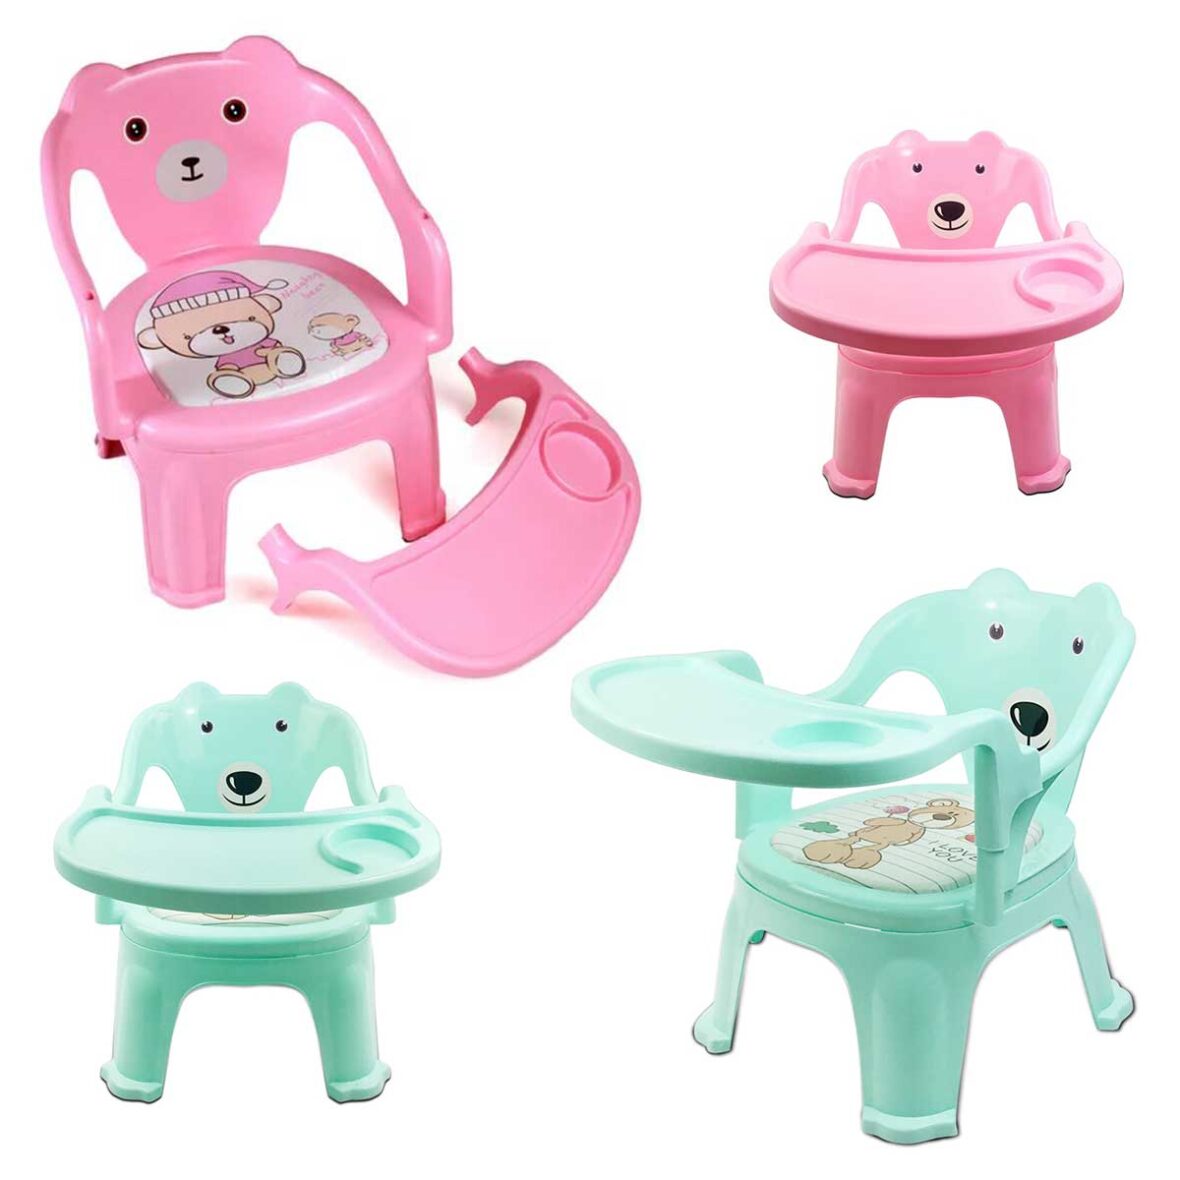 Children’s Dining Chair with Plate